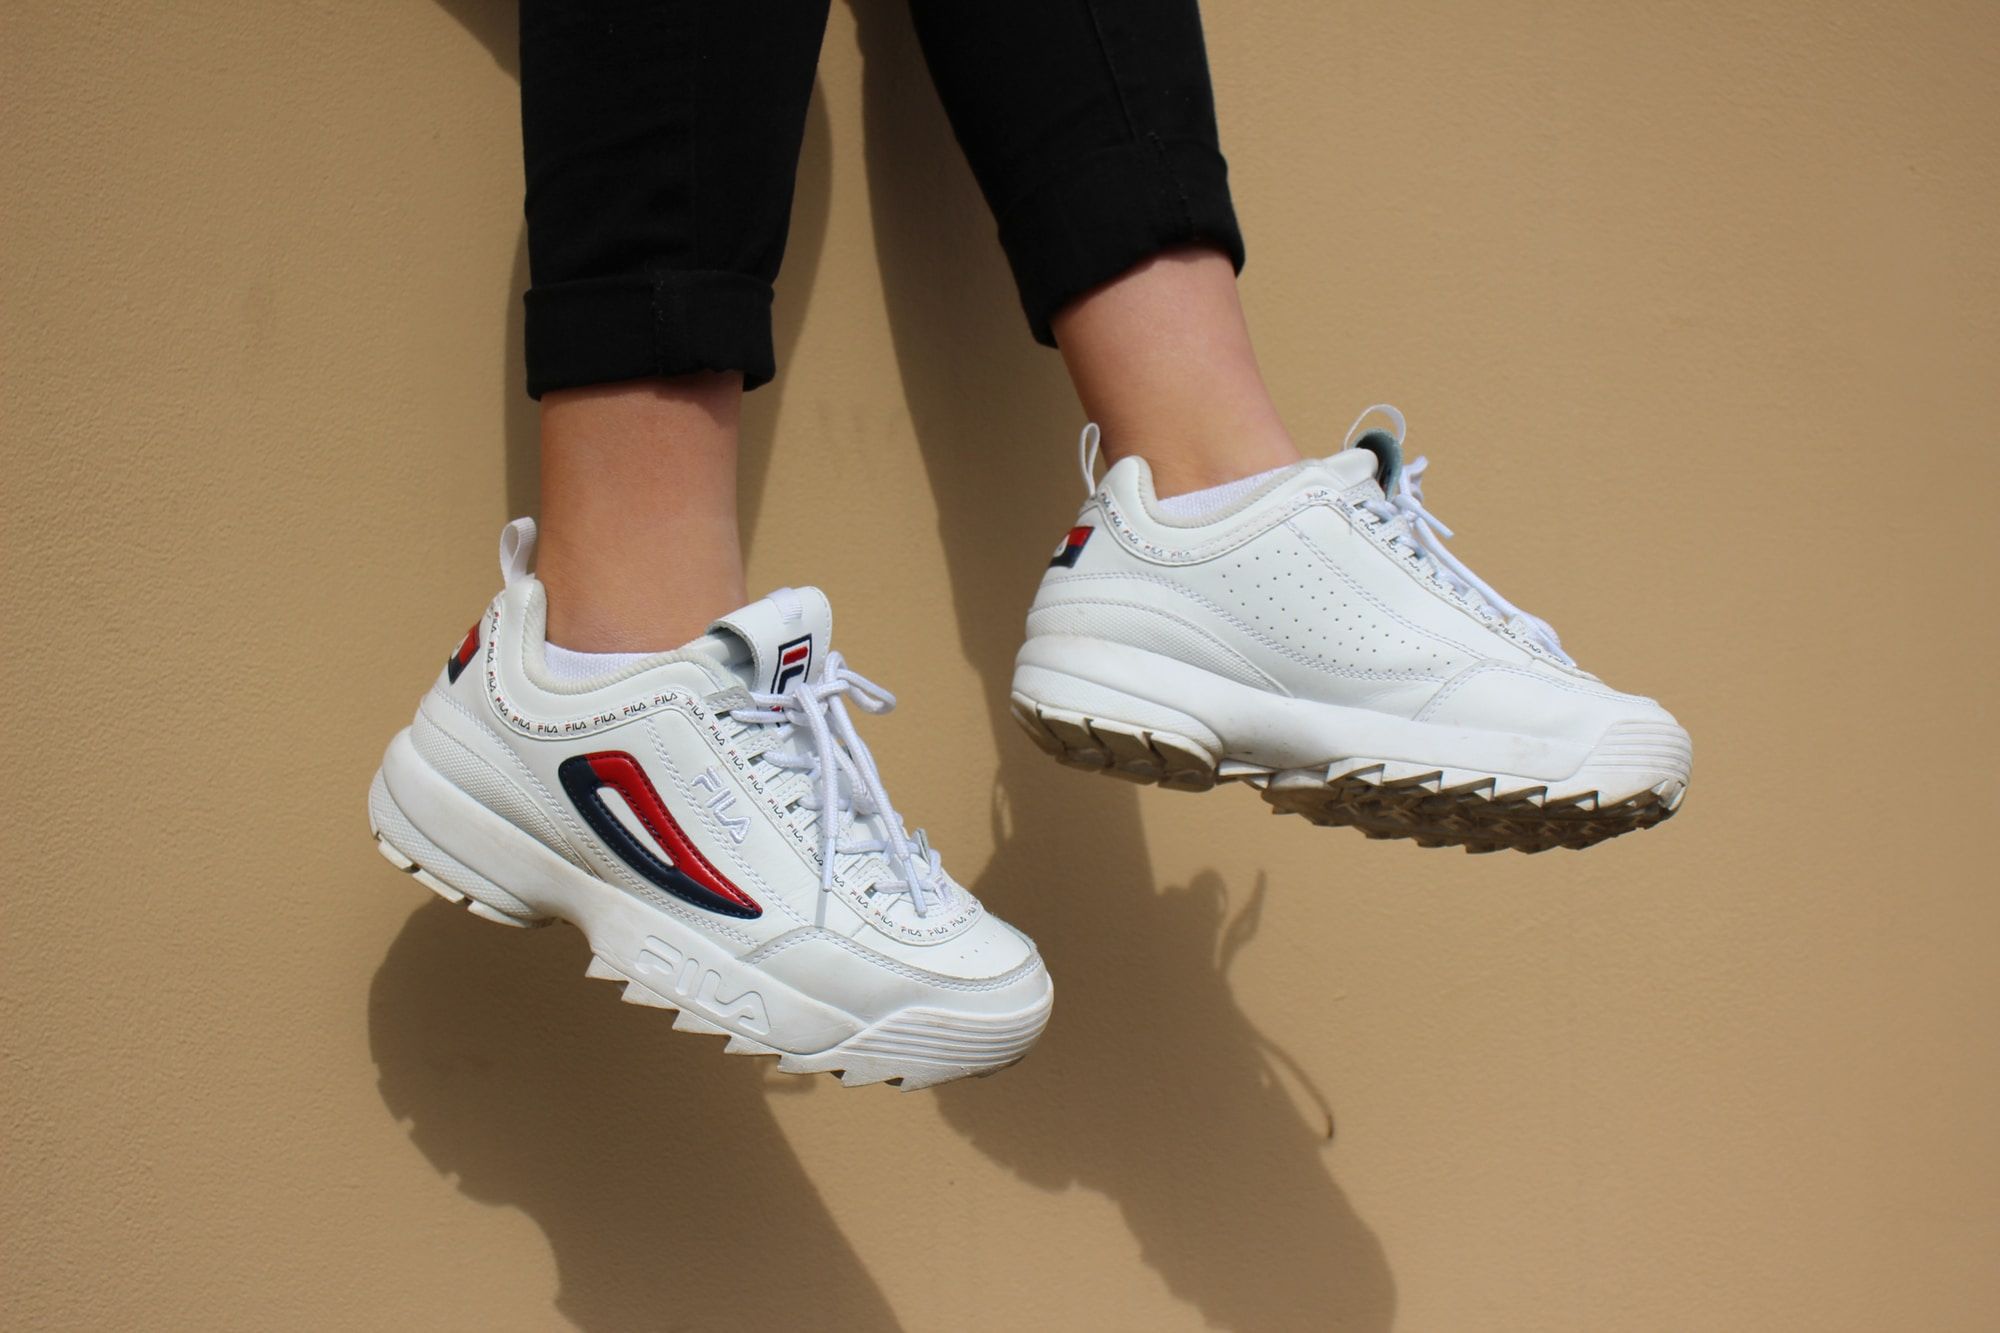 A pair of white Fila trainers